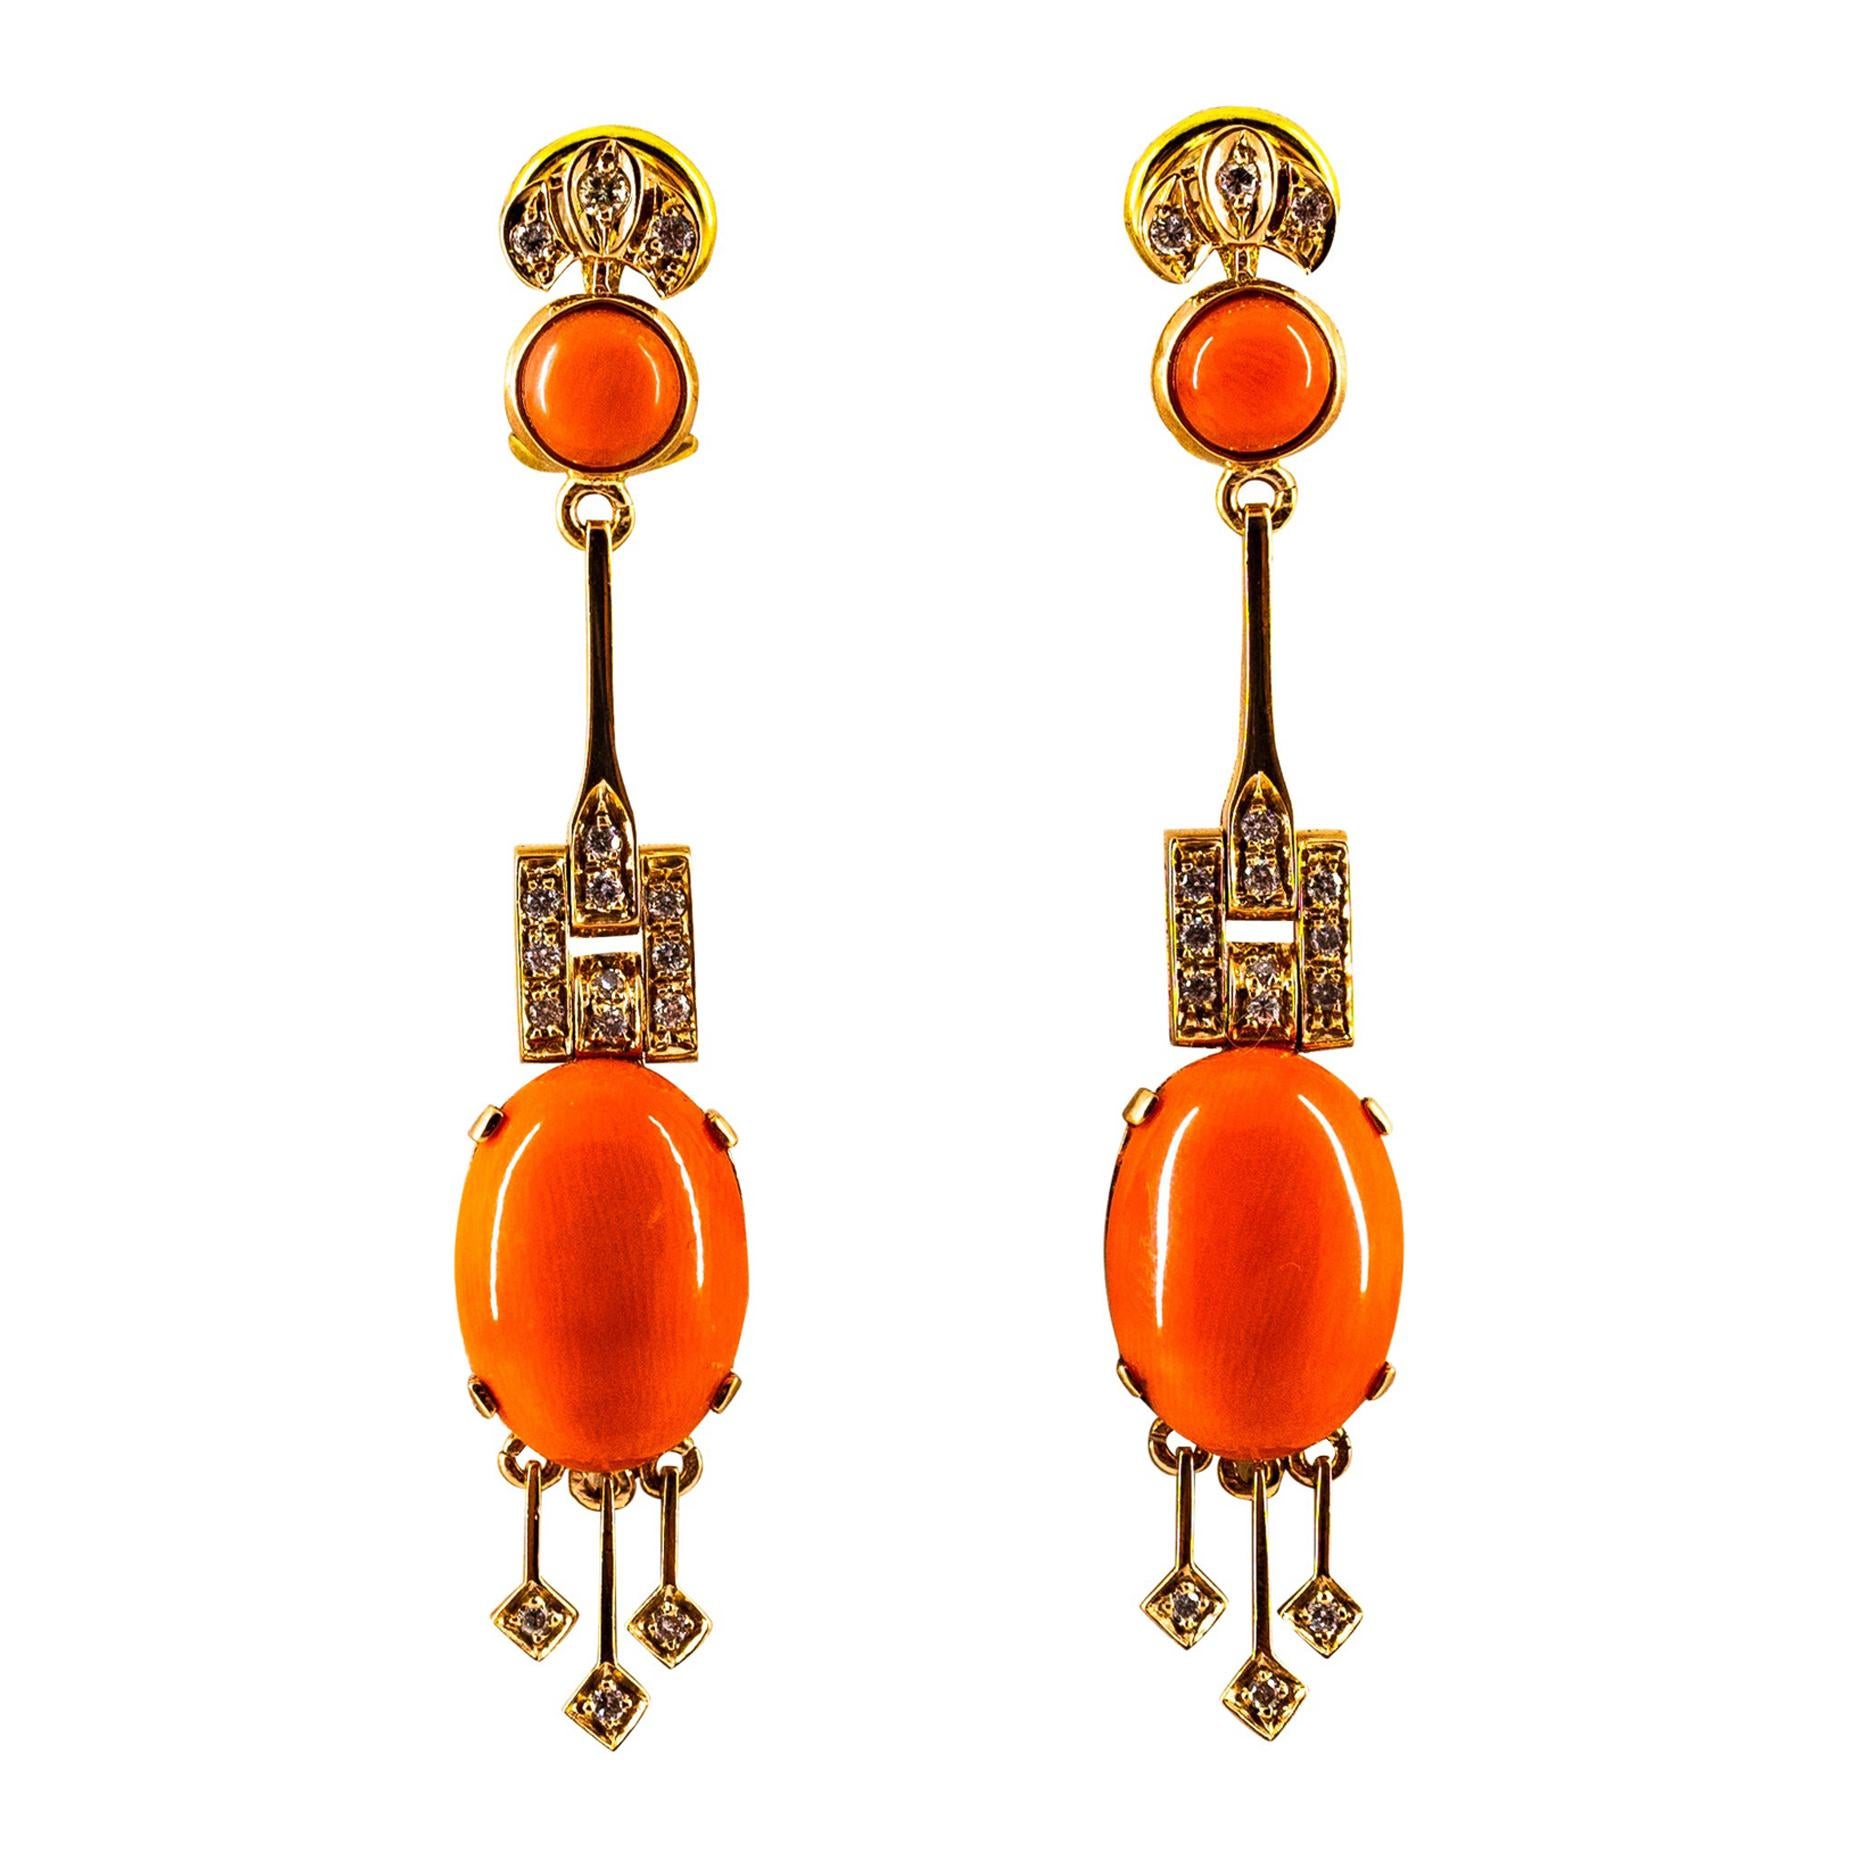 For any problems related to some materials contained in the items that do not allow shipping and require specific documents that require a particular period, please contact the seller with a private message to solve the problem.

These Earrings are